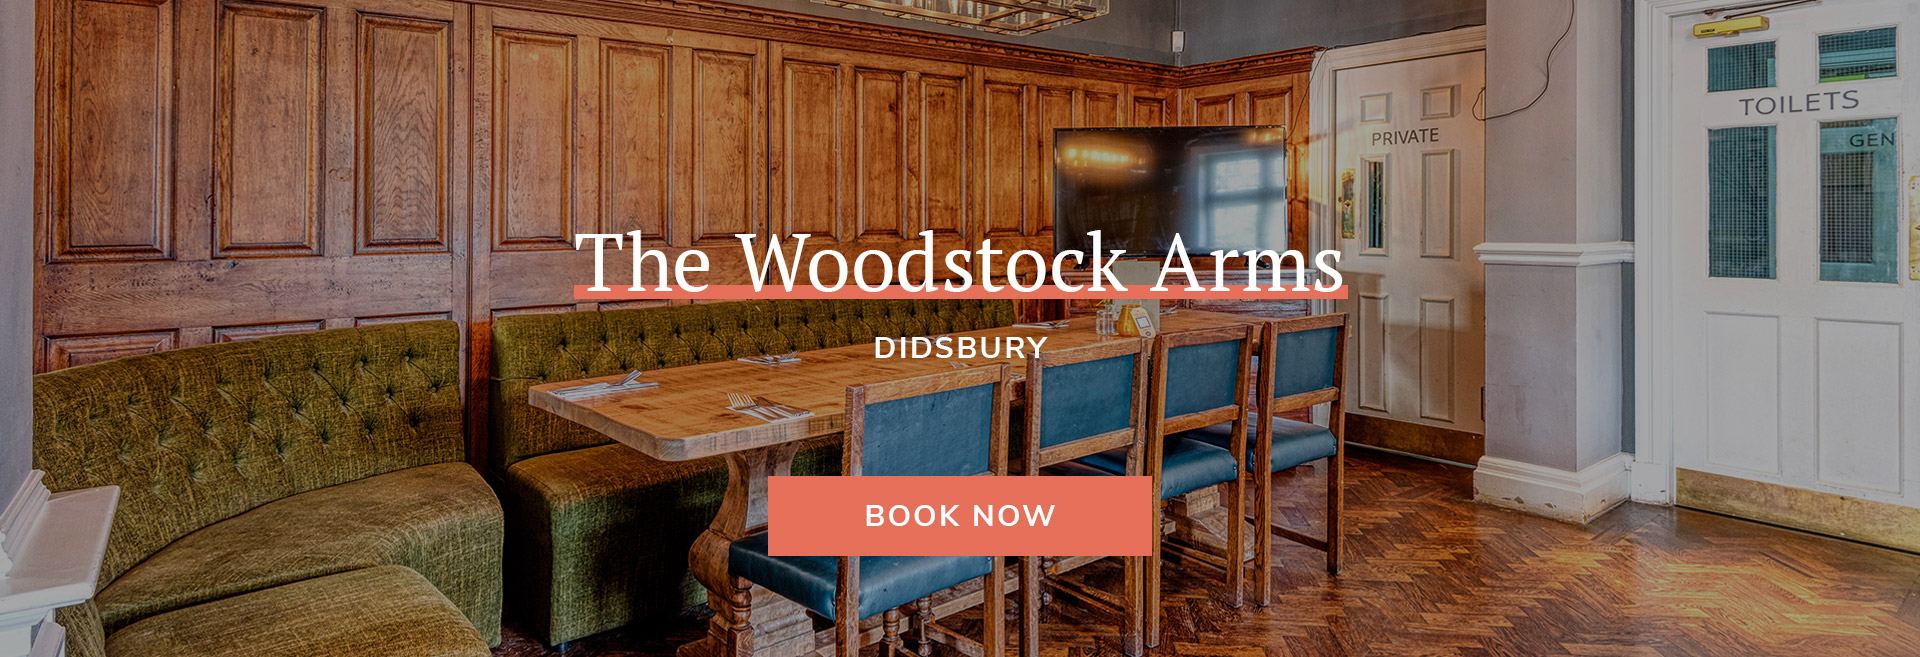 The Woodstock Arms Banner 2